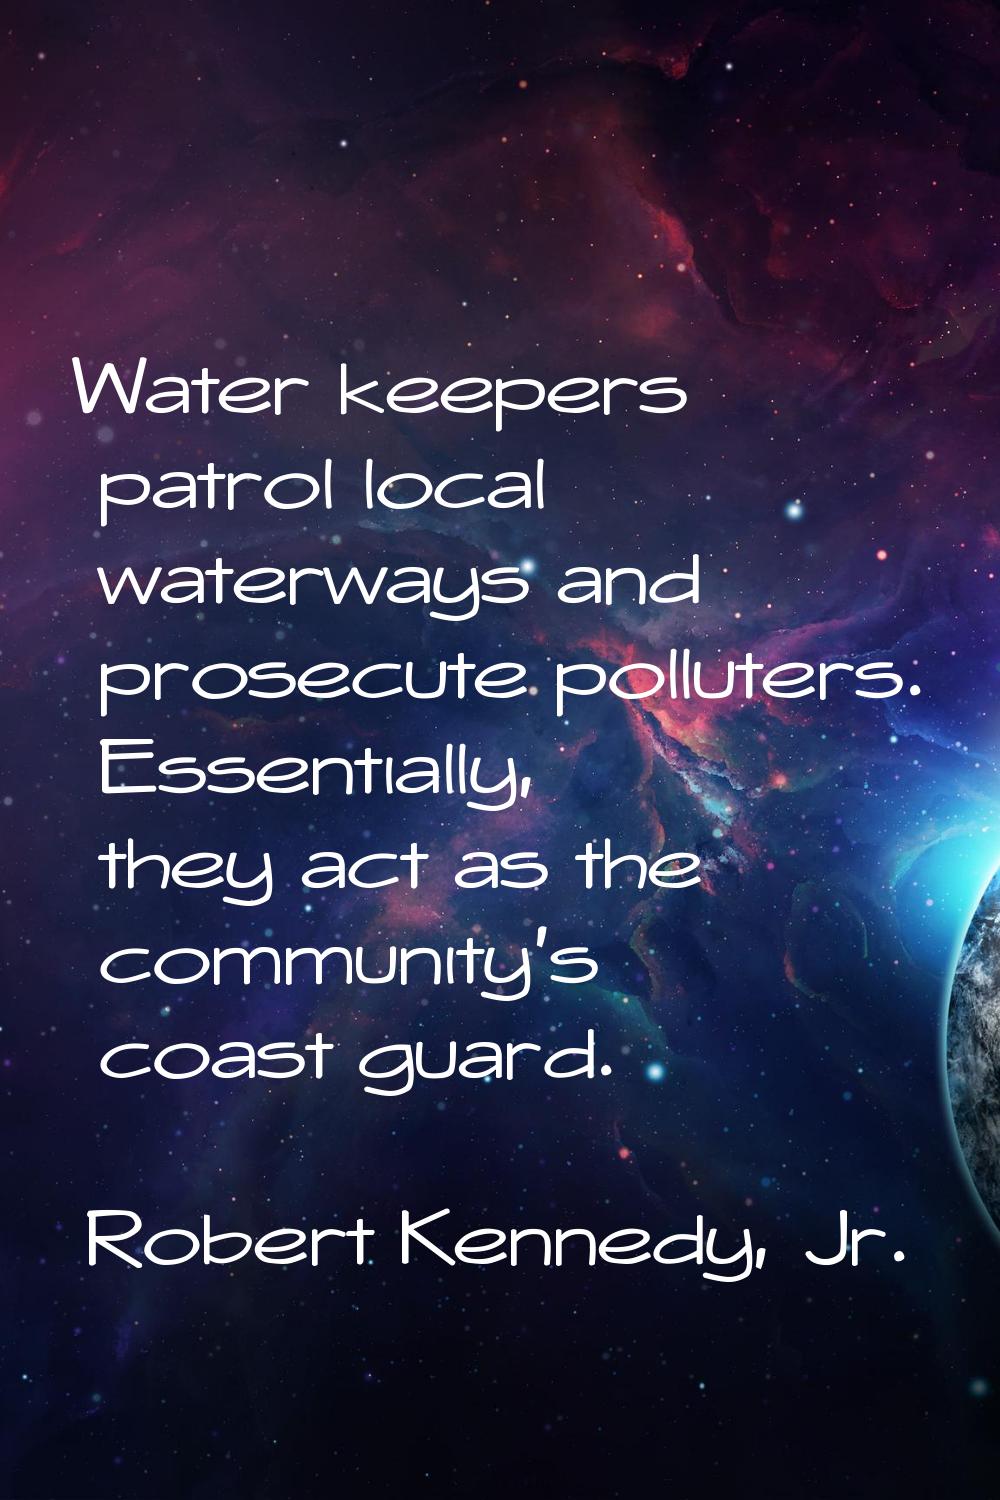 Water keepers patrol local waterways and prosecute polluters. Essentially, they act as the communit